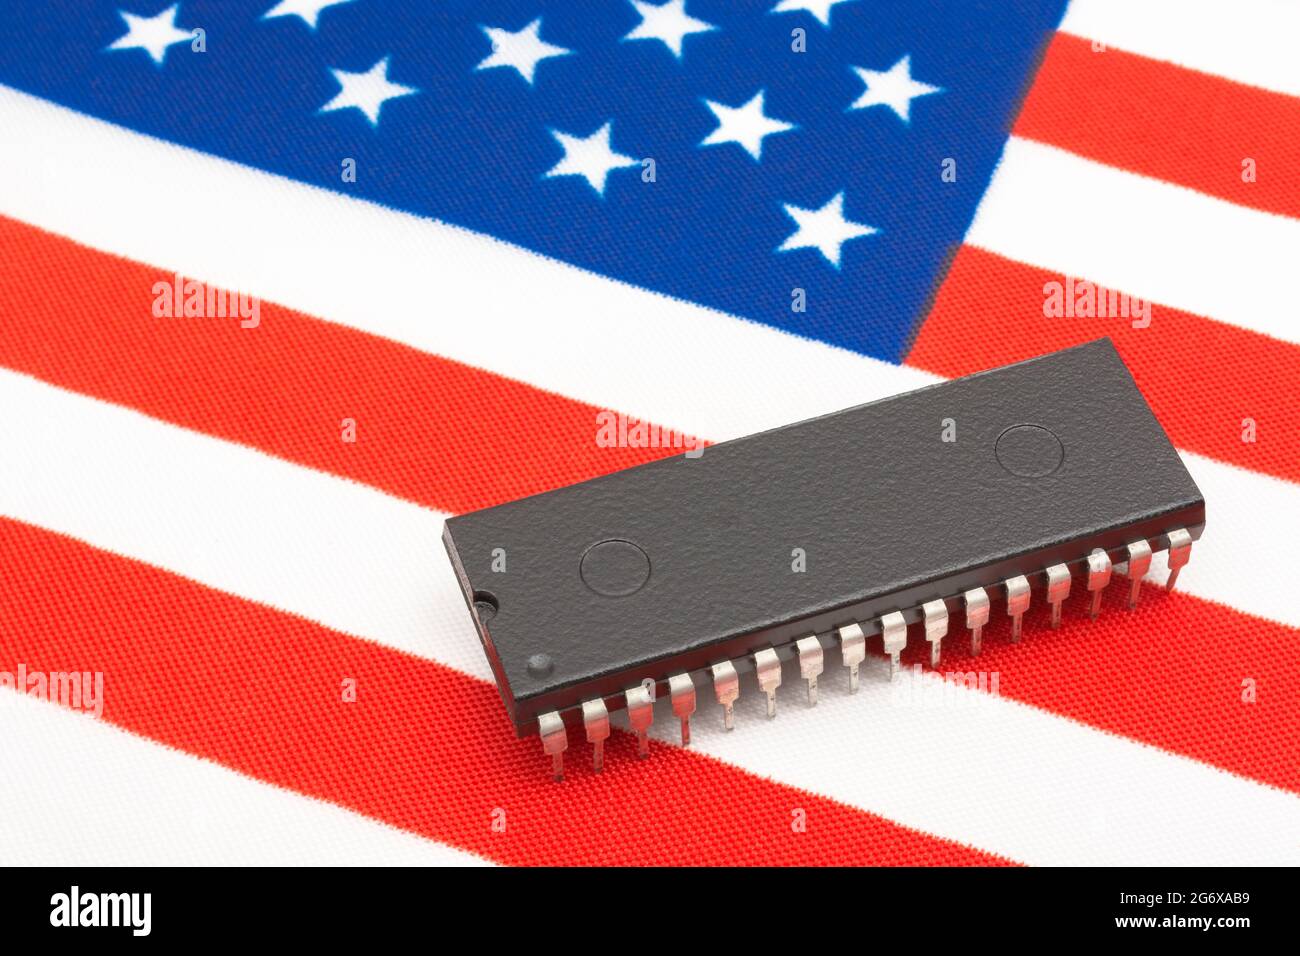 Close shot of integrated circuit / EPROM chip on small US Stars & Stripes flag. For US semiconductor shortages in 2021, American chip supremacy. Stock Photo